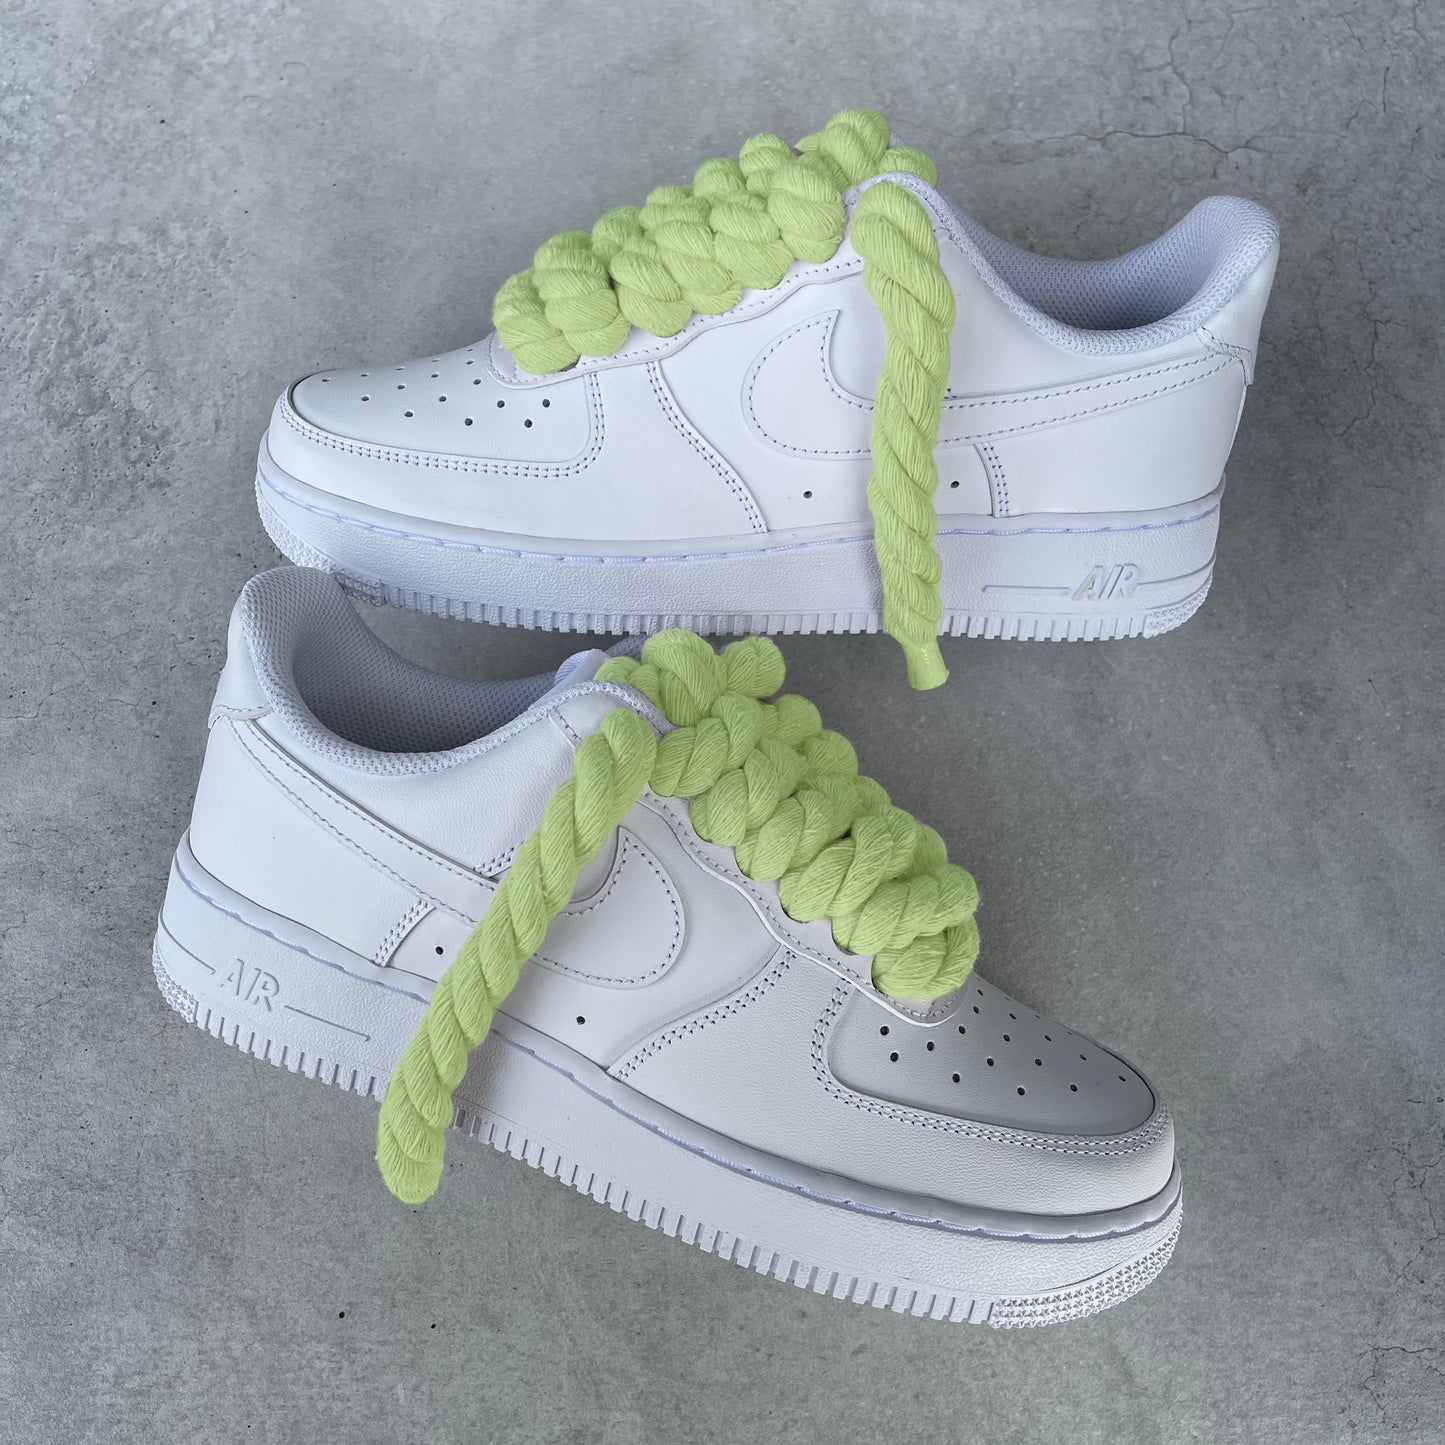 Custom AIR FORCE 1 - Rope laces (bright green)